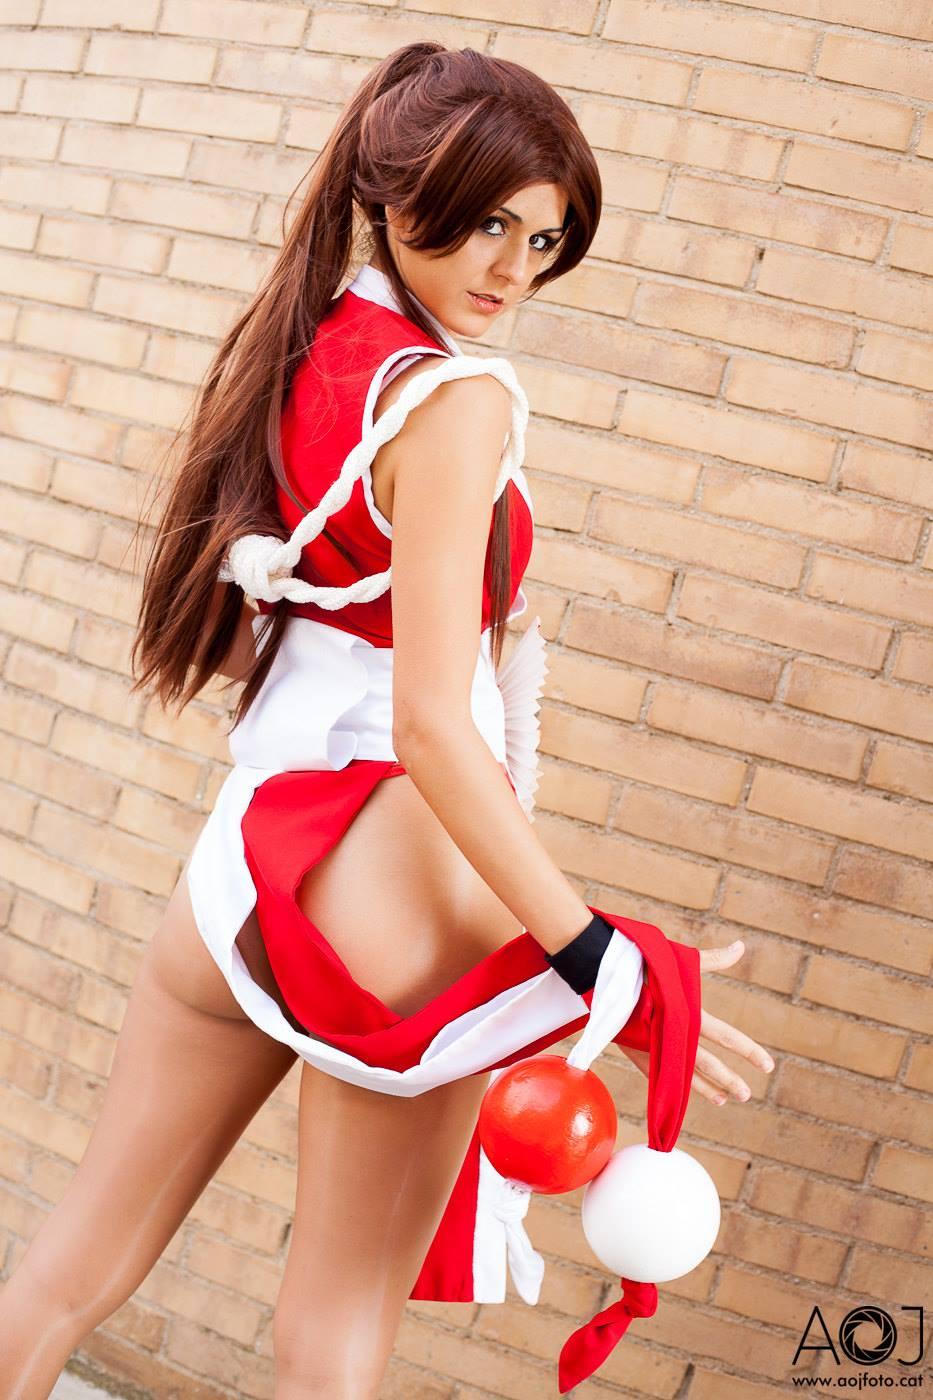 50+ Hot Pictures Of Mai Shiranui From Fatal Fury And The King Of Fighters Series 42